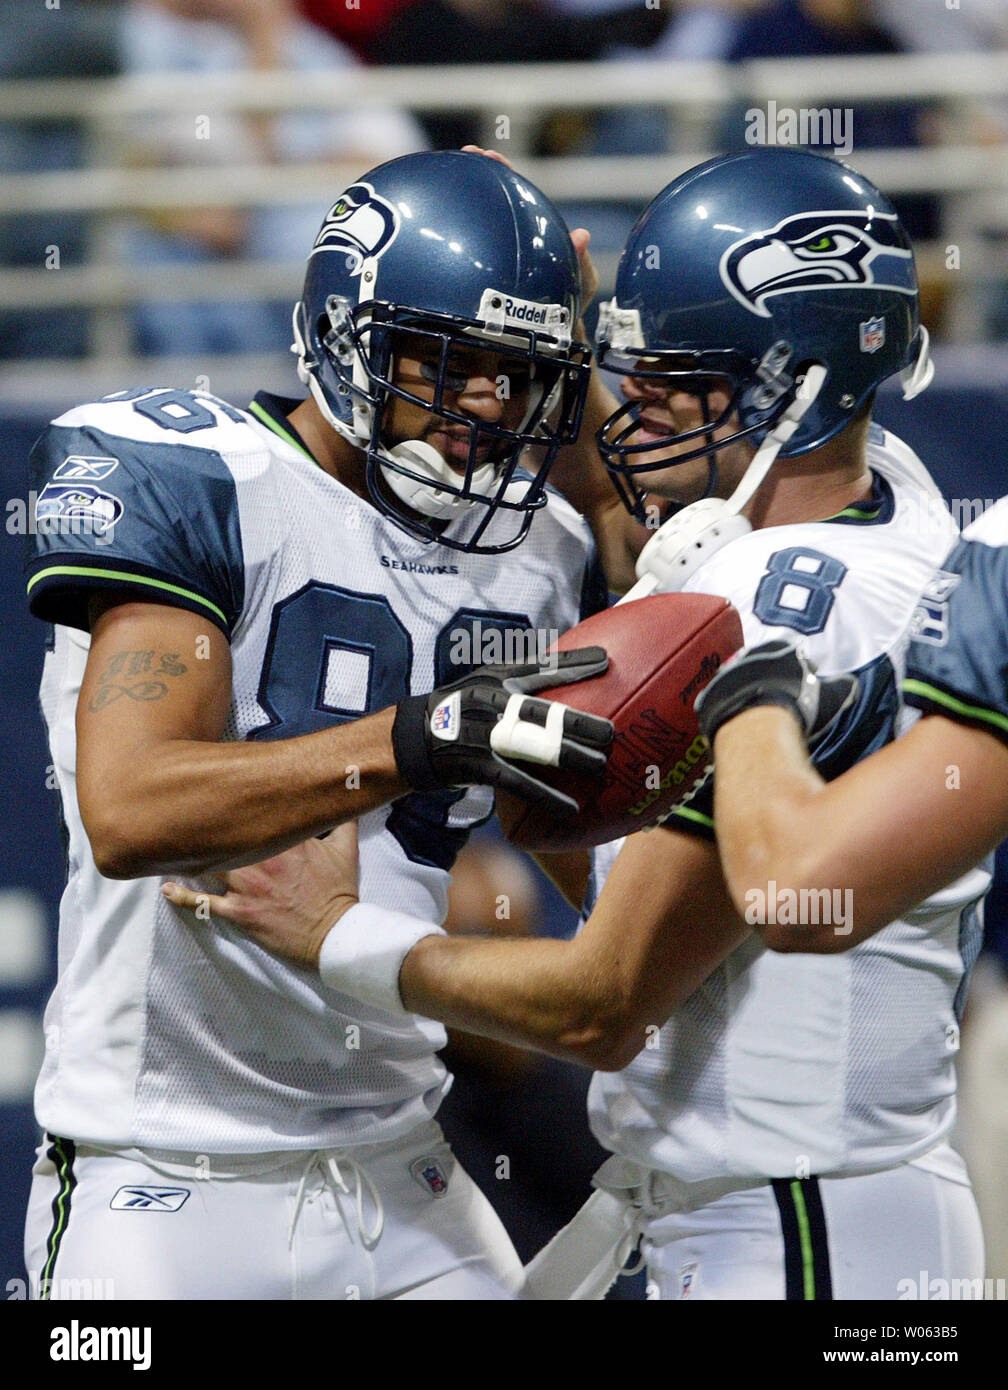 Seattle Seahawks Matt Hasselbeck (R) congratulates wide receiver Jerramy Stevens after catching a 29 yard pass for a touchdown in the first quarter against the St. Louis Rams at the Edward Jones Dome in St. Louis on October 9, 2005. (UPI Photo/Bill Greenblatt) Stock Photo